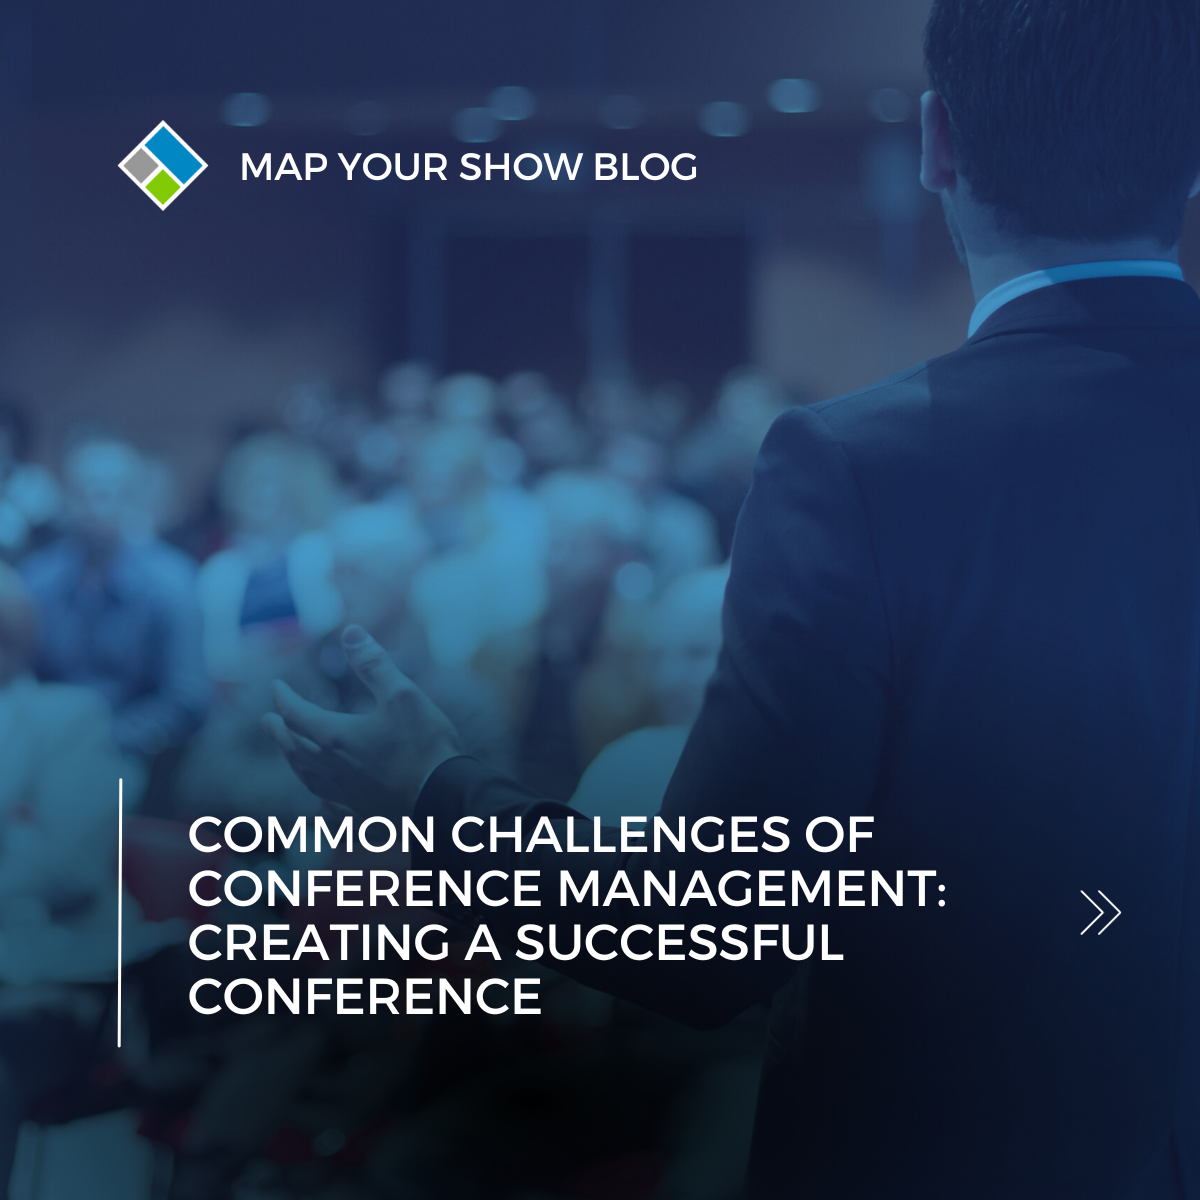 Map Your Show. Trade Show and Conference Management Software. Common Challenges of Conference Management: Creating a Successful Conference